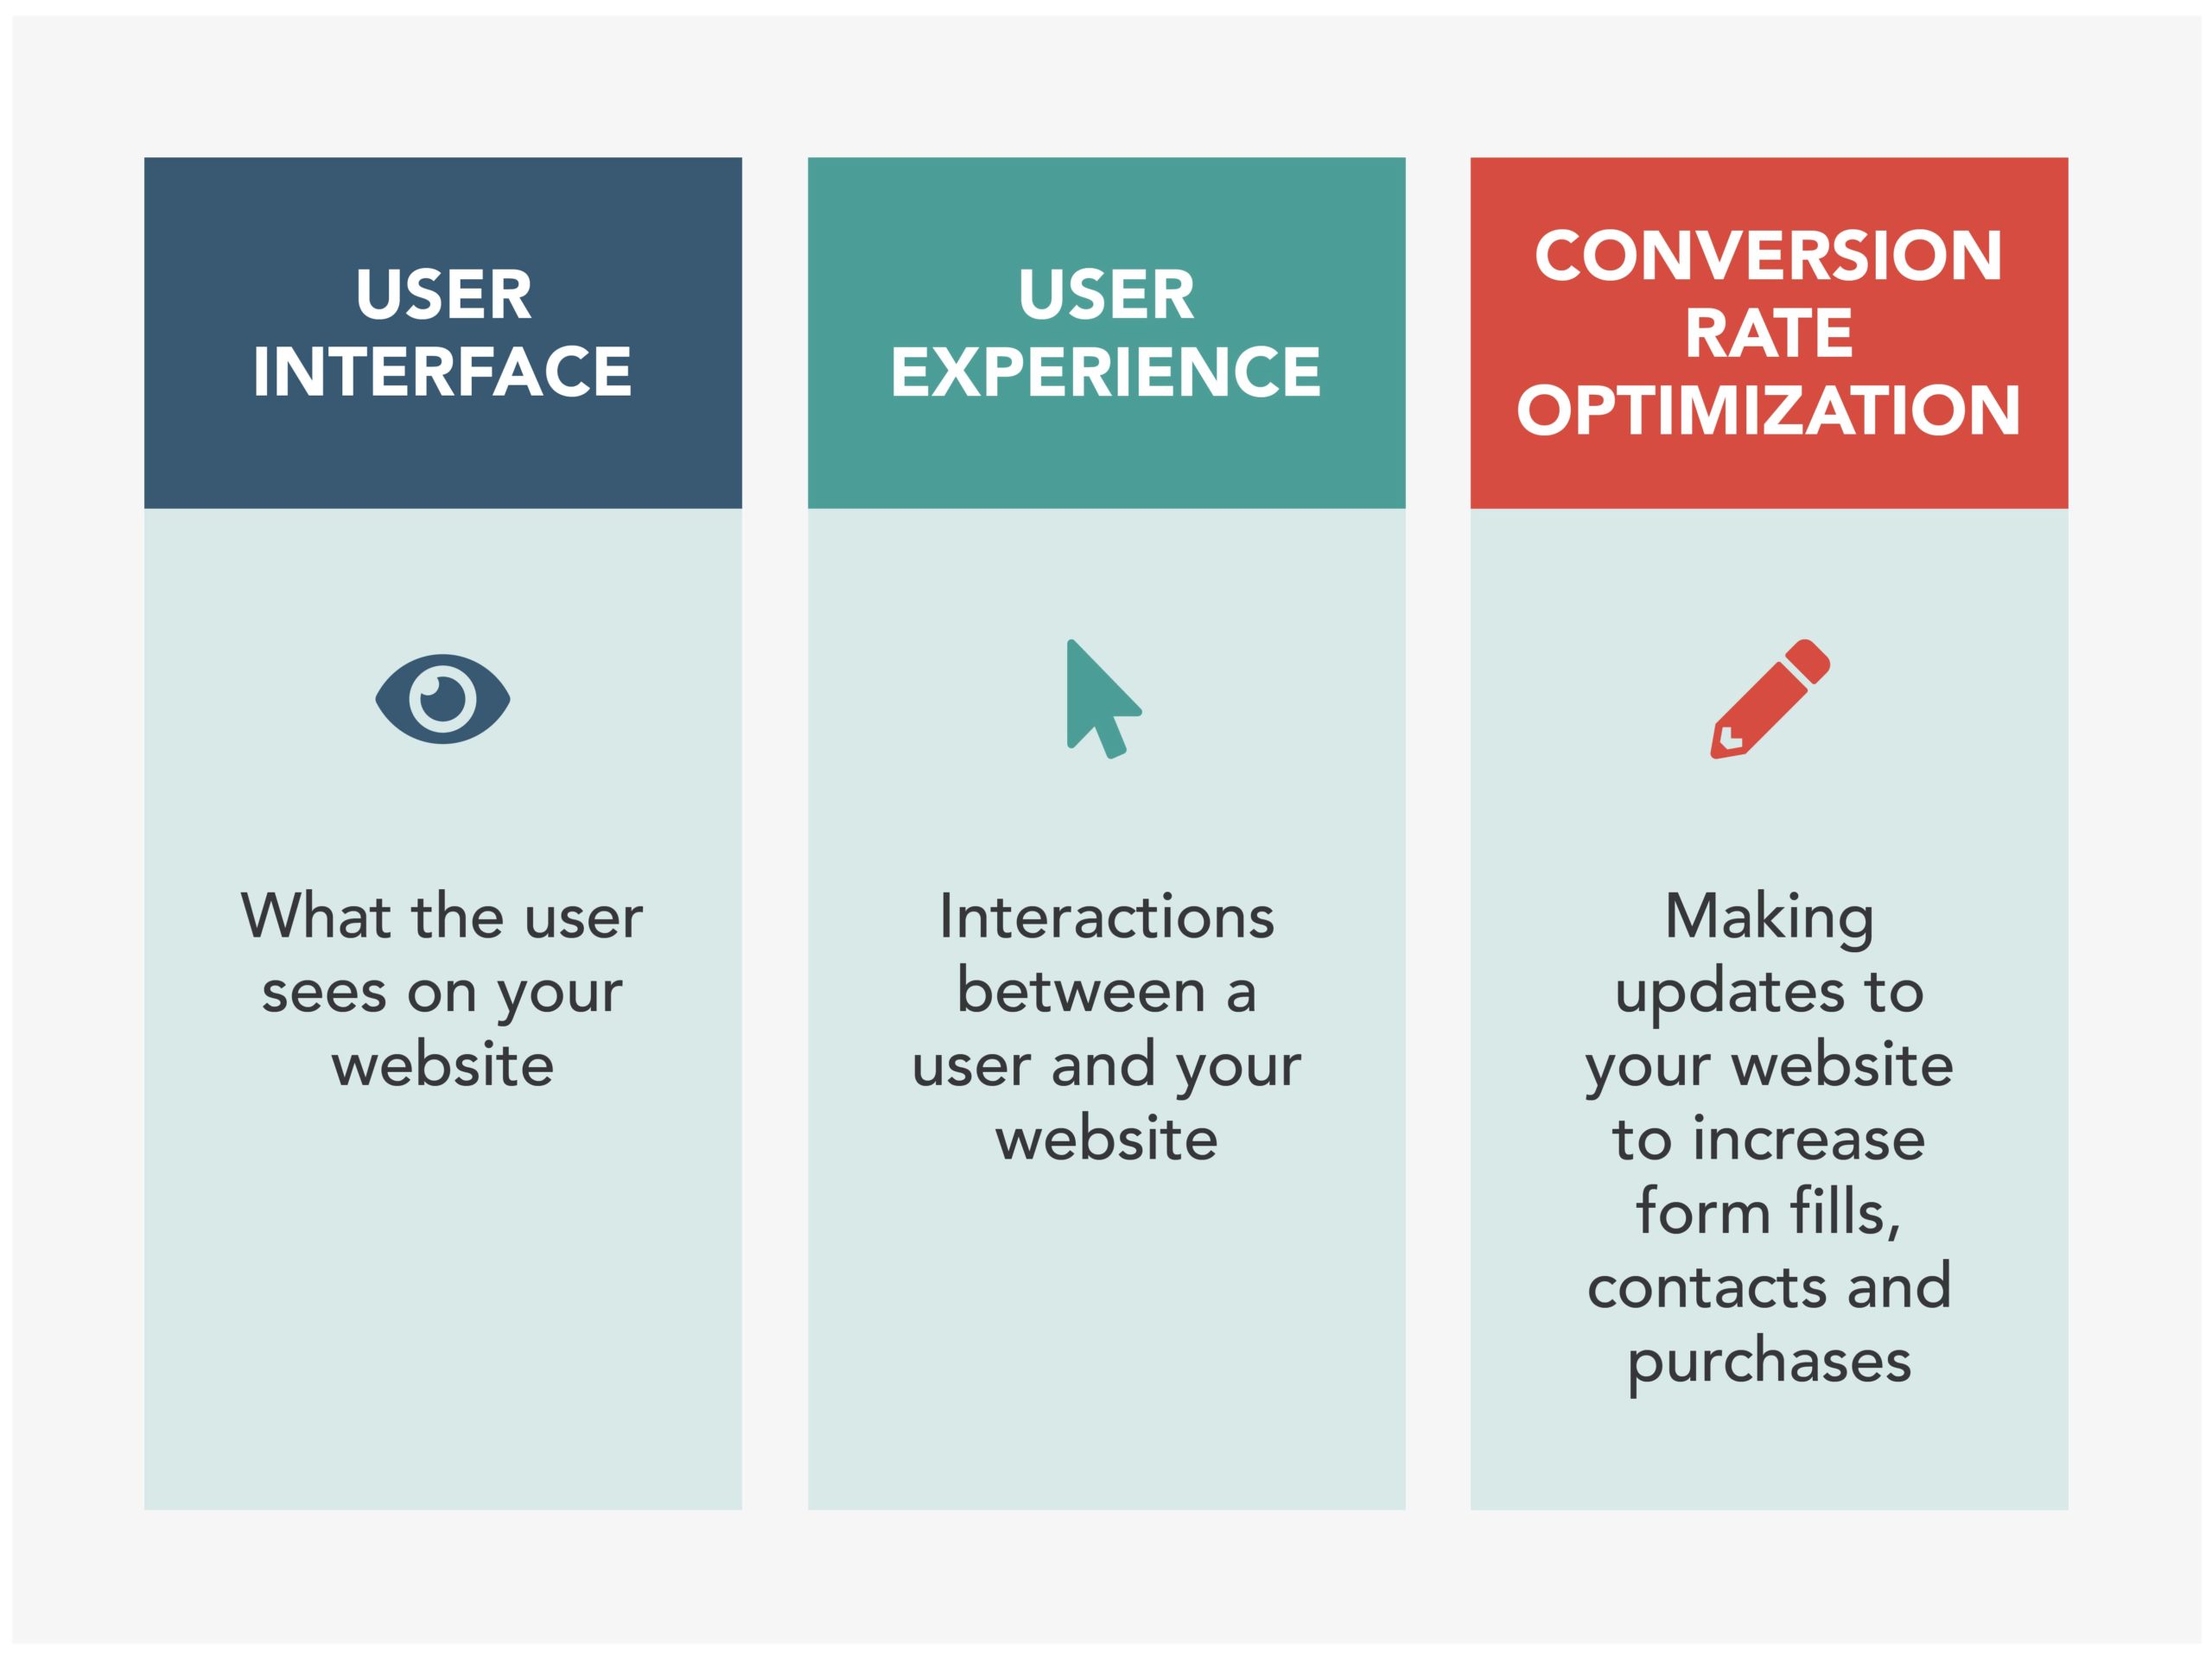 What Does User Experience Mean?